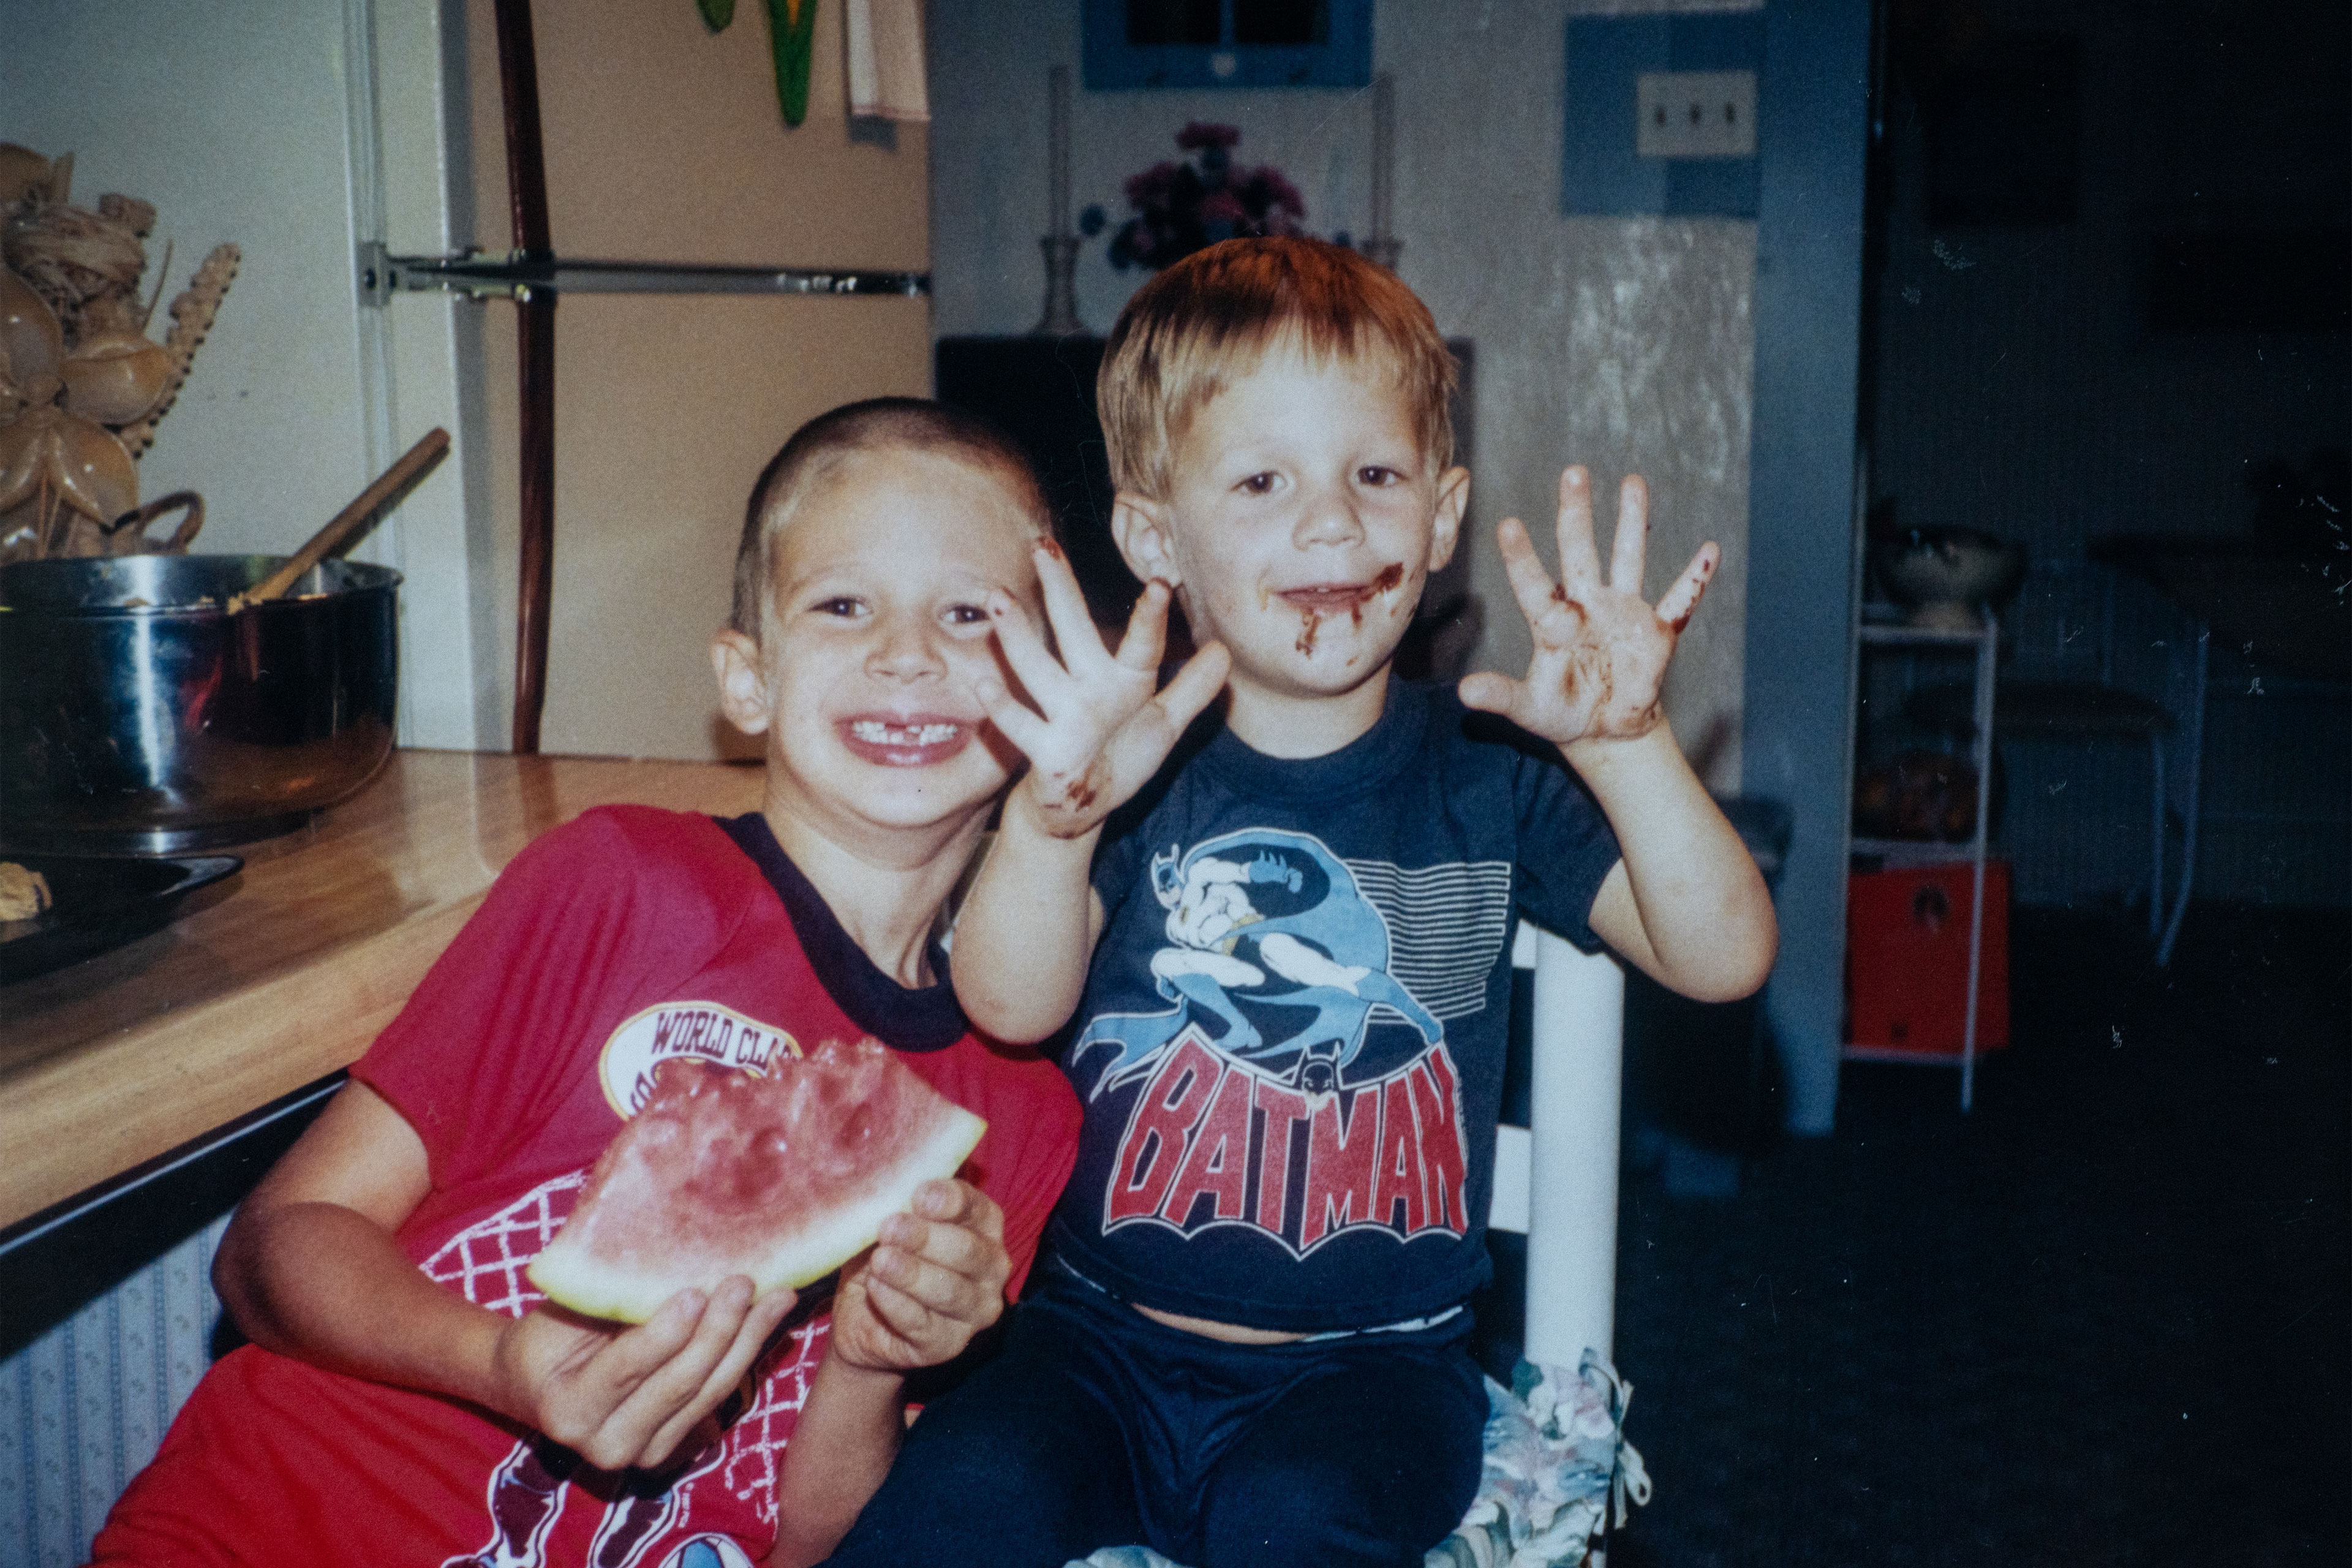 Two children, both boys, smile at the camera. One boy, in a red tshirt, is eating a slice of watermelon and has several teeth missing. The other, in a navy Batman tshirt, holds up his hands which, like his face, are covered in chocolate.